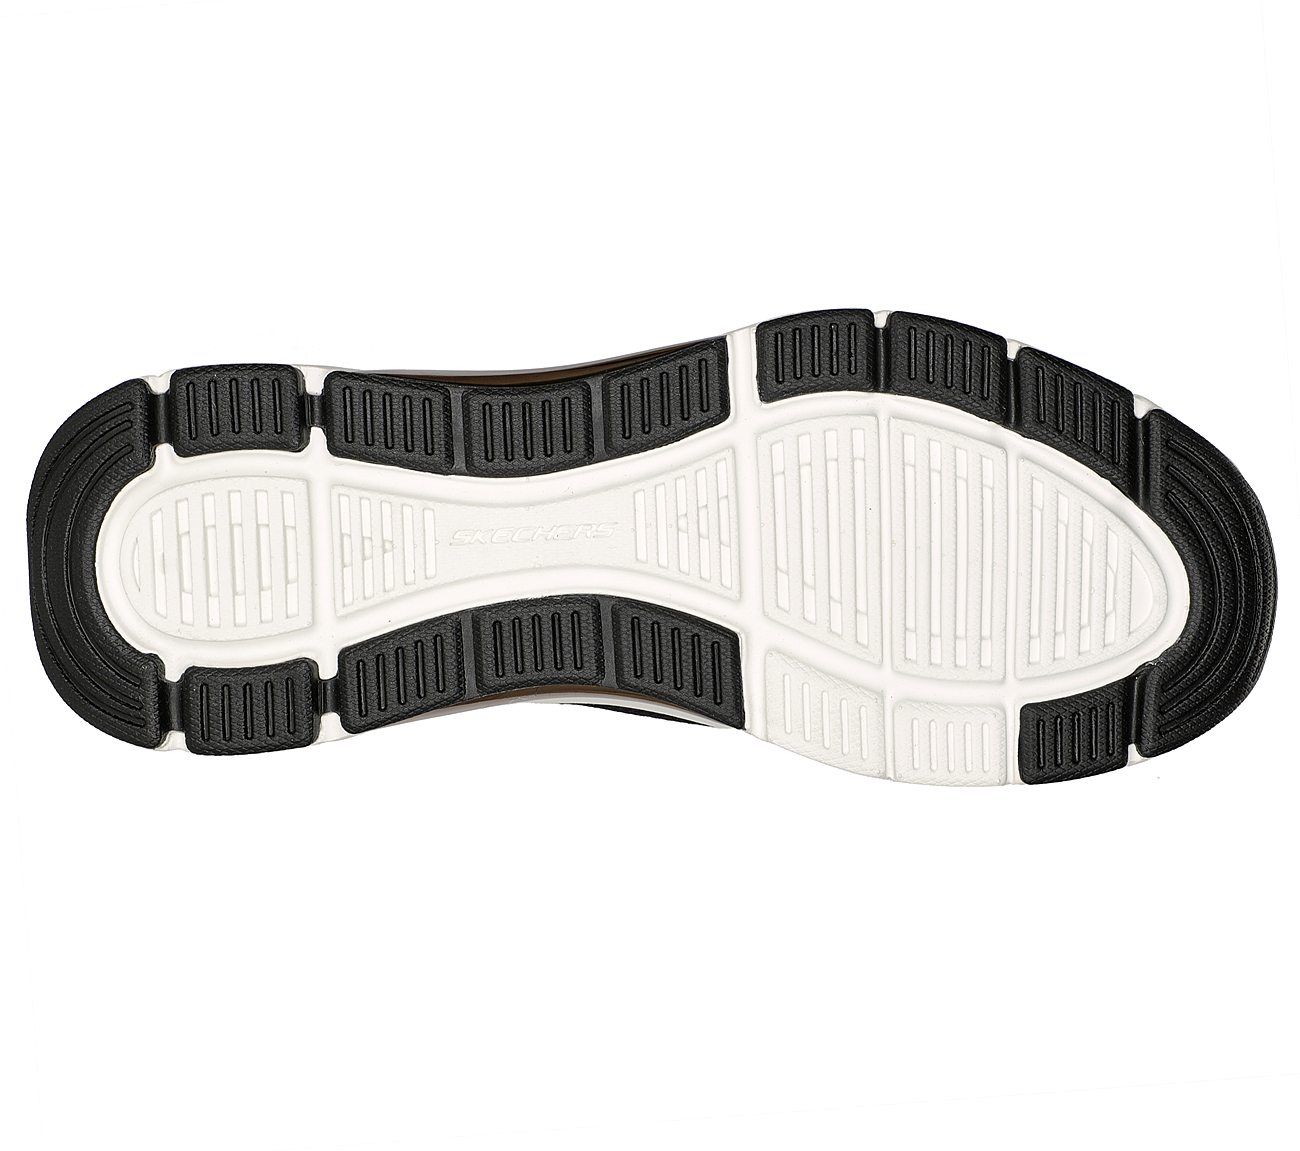 SKECH-AIR ARCH FIT, BLACK/WHITE Footwear Bottom View